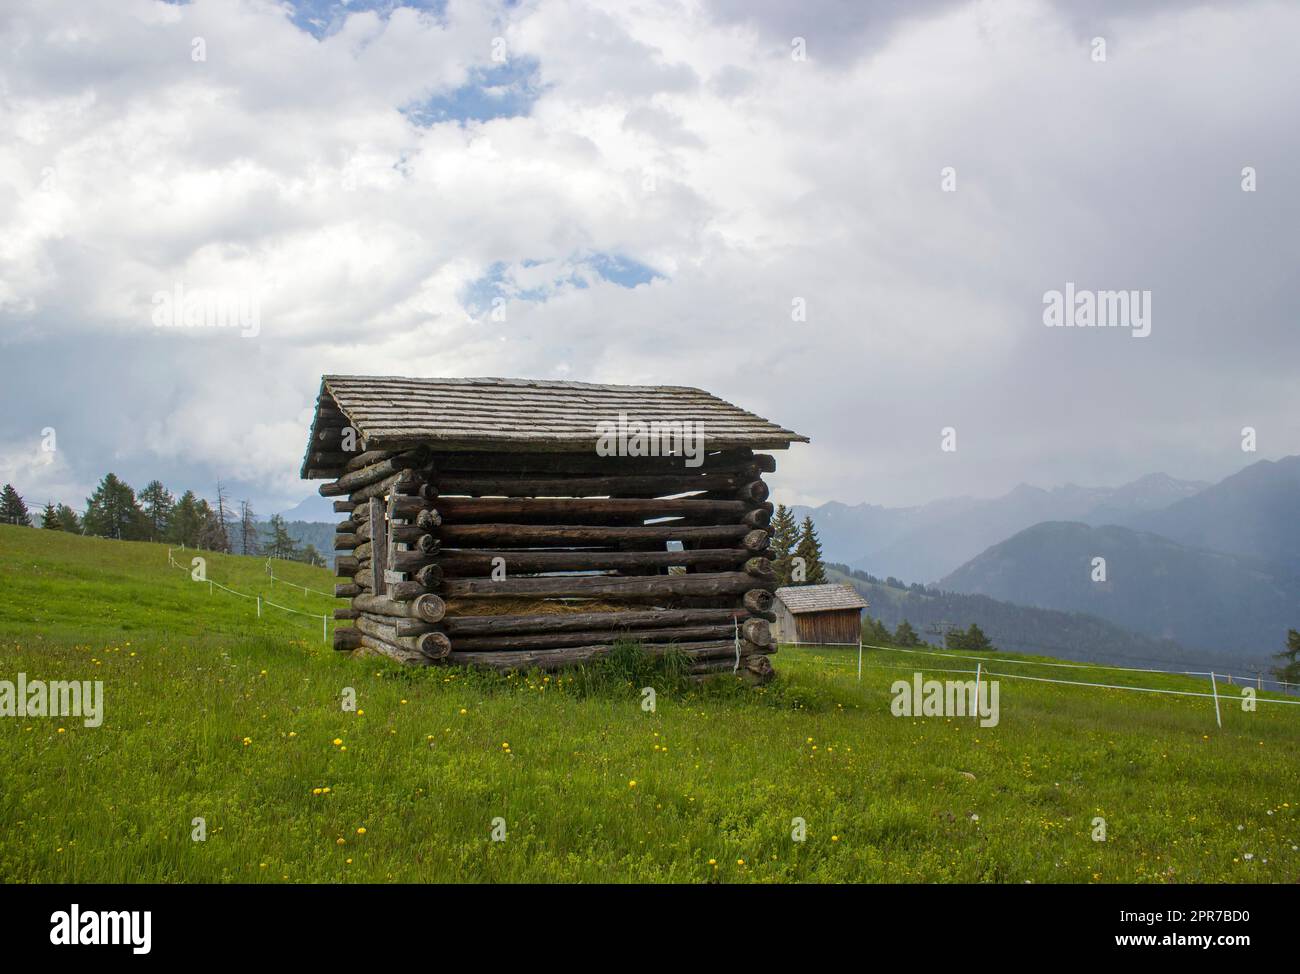 View of alpine landscape in summer with barn house surrounded by a green field Stock Photo